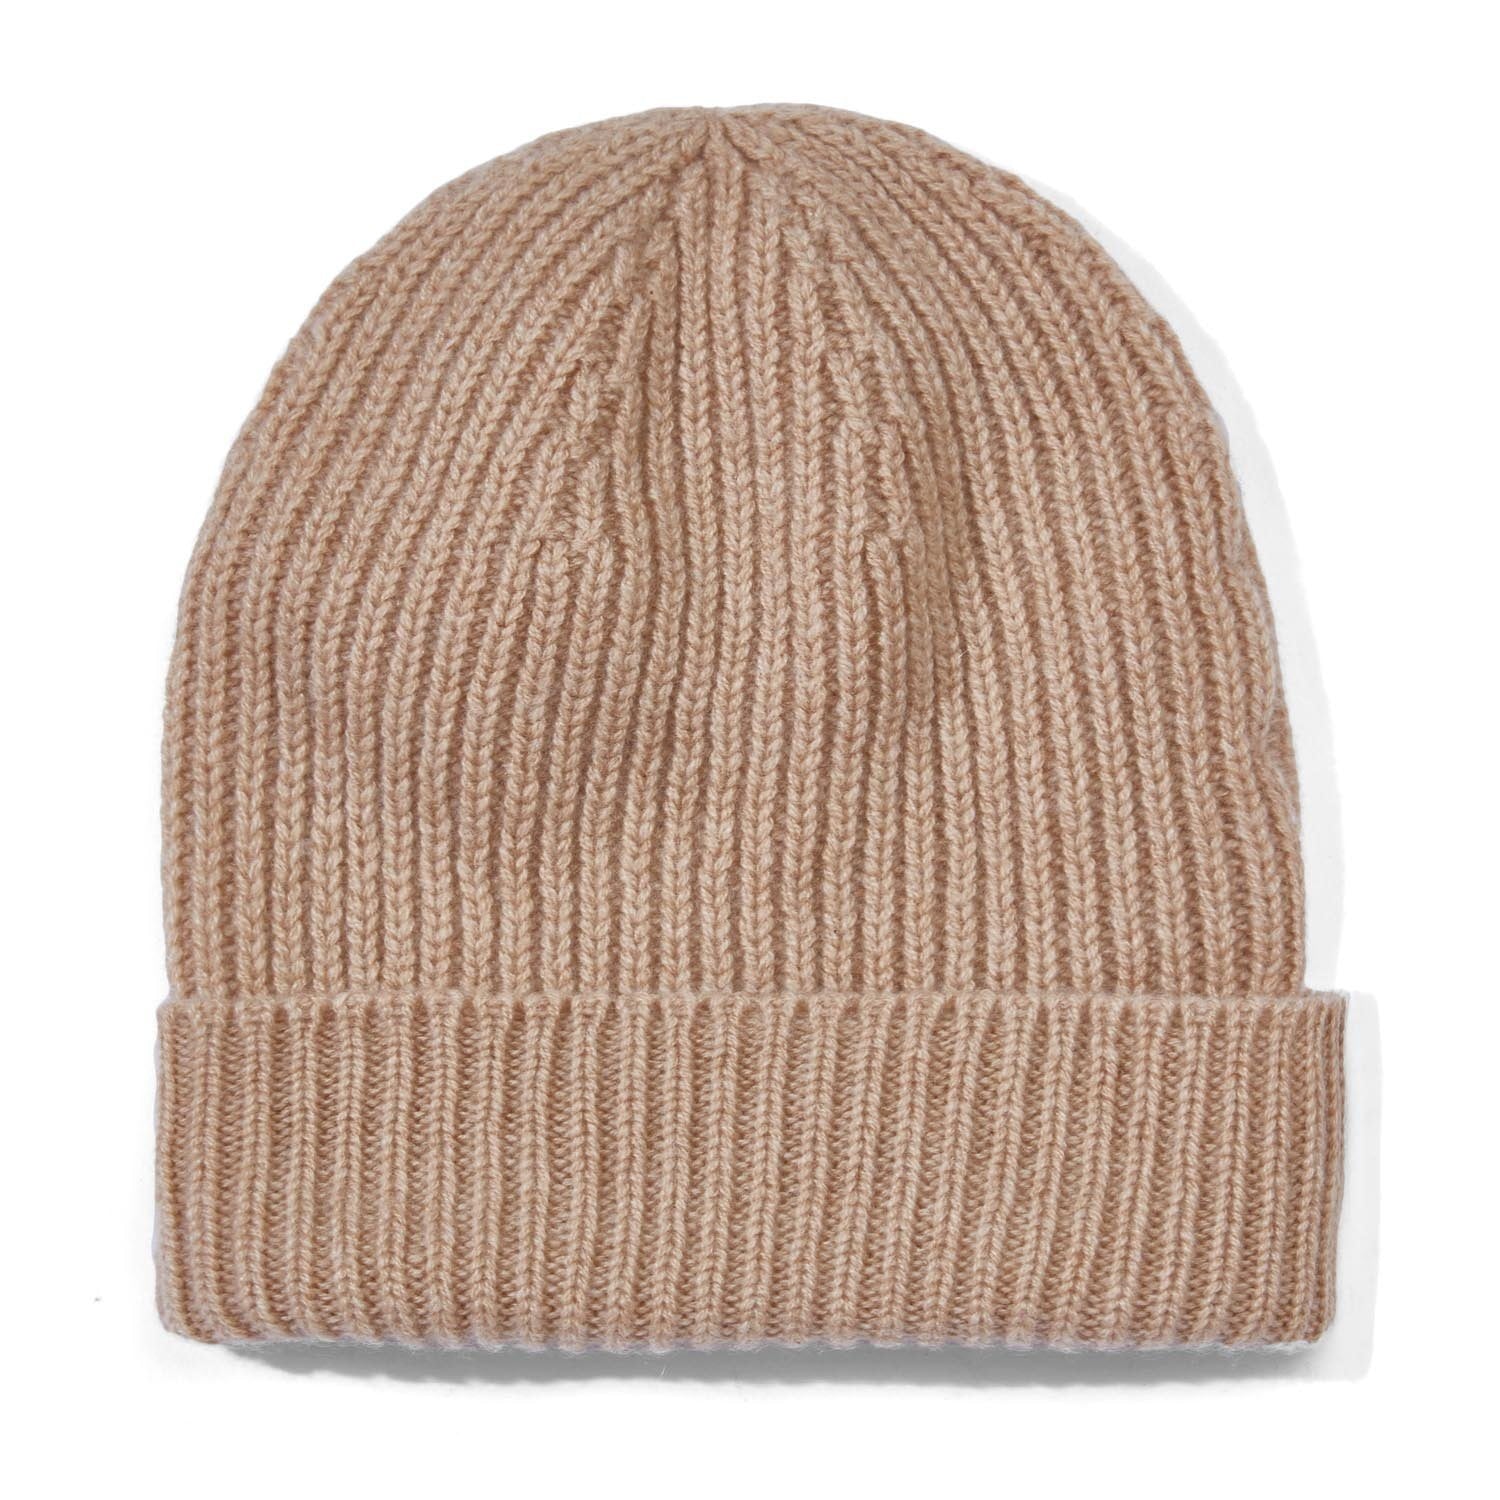 Women’s Neutrals 100% Cashmere Ribbed Beanie Hat - Camel One Size Paul James Knitwear